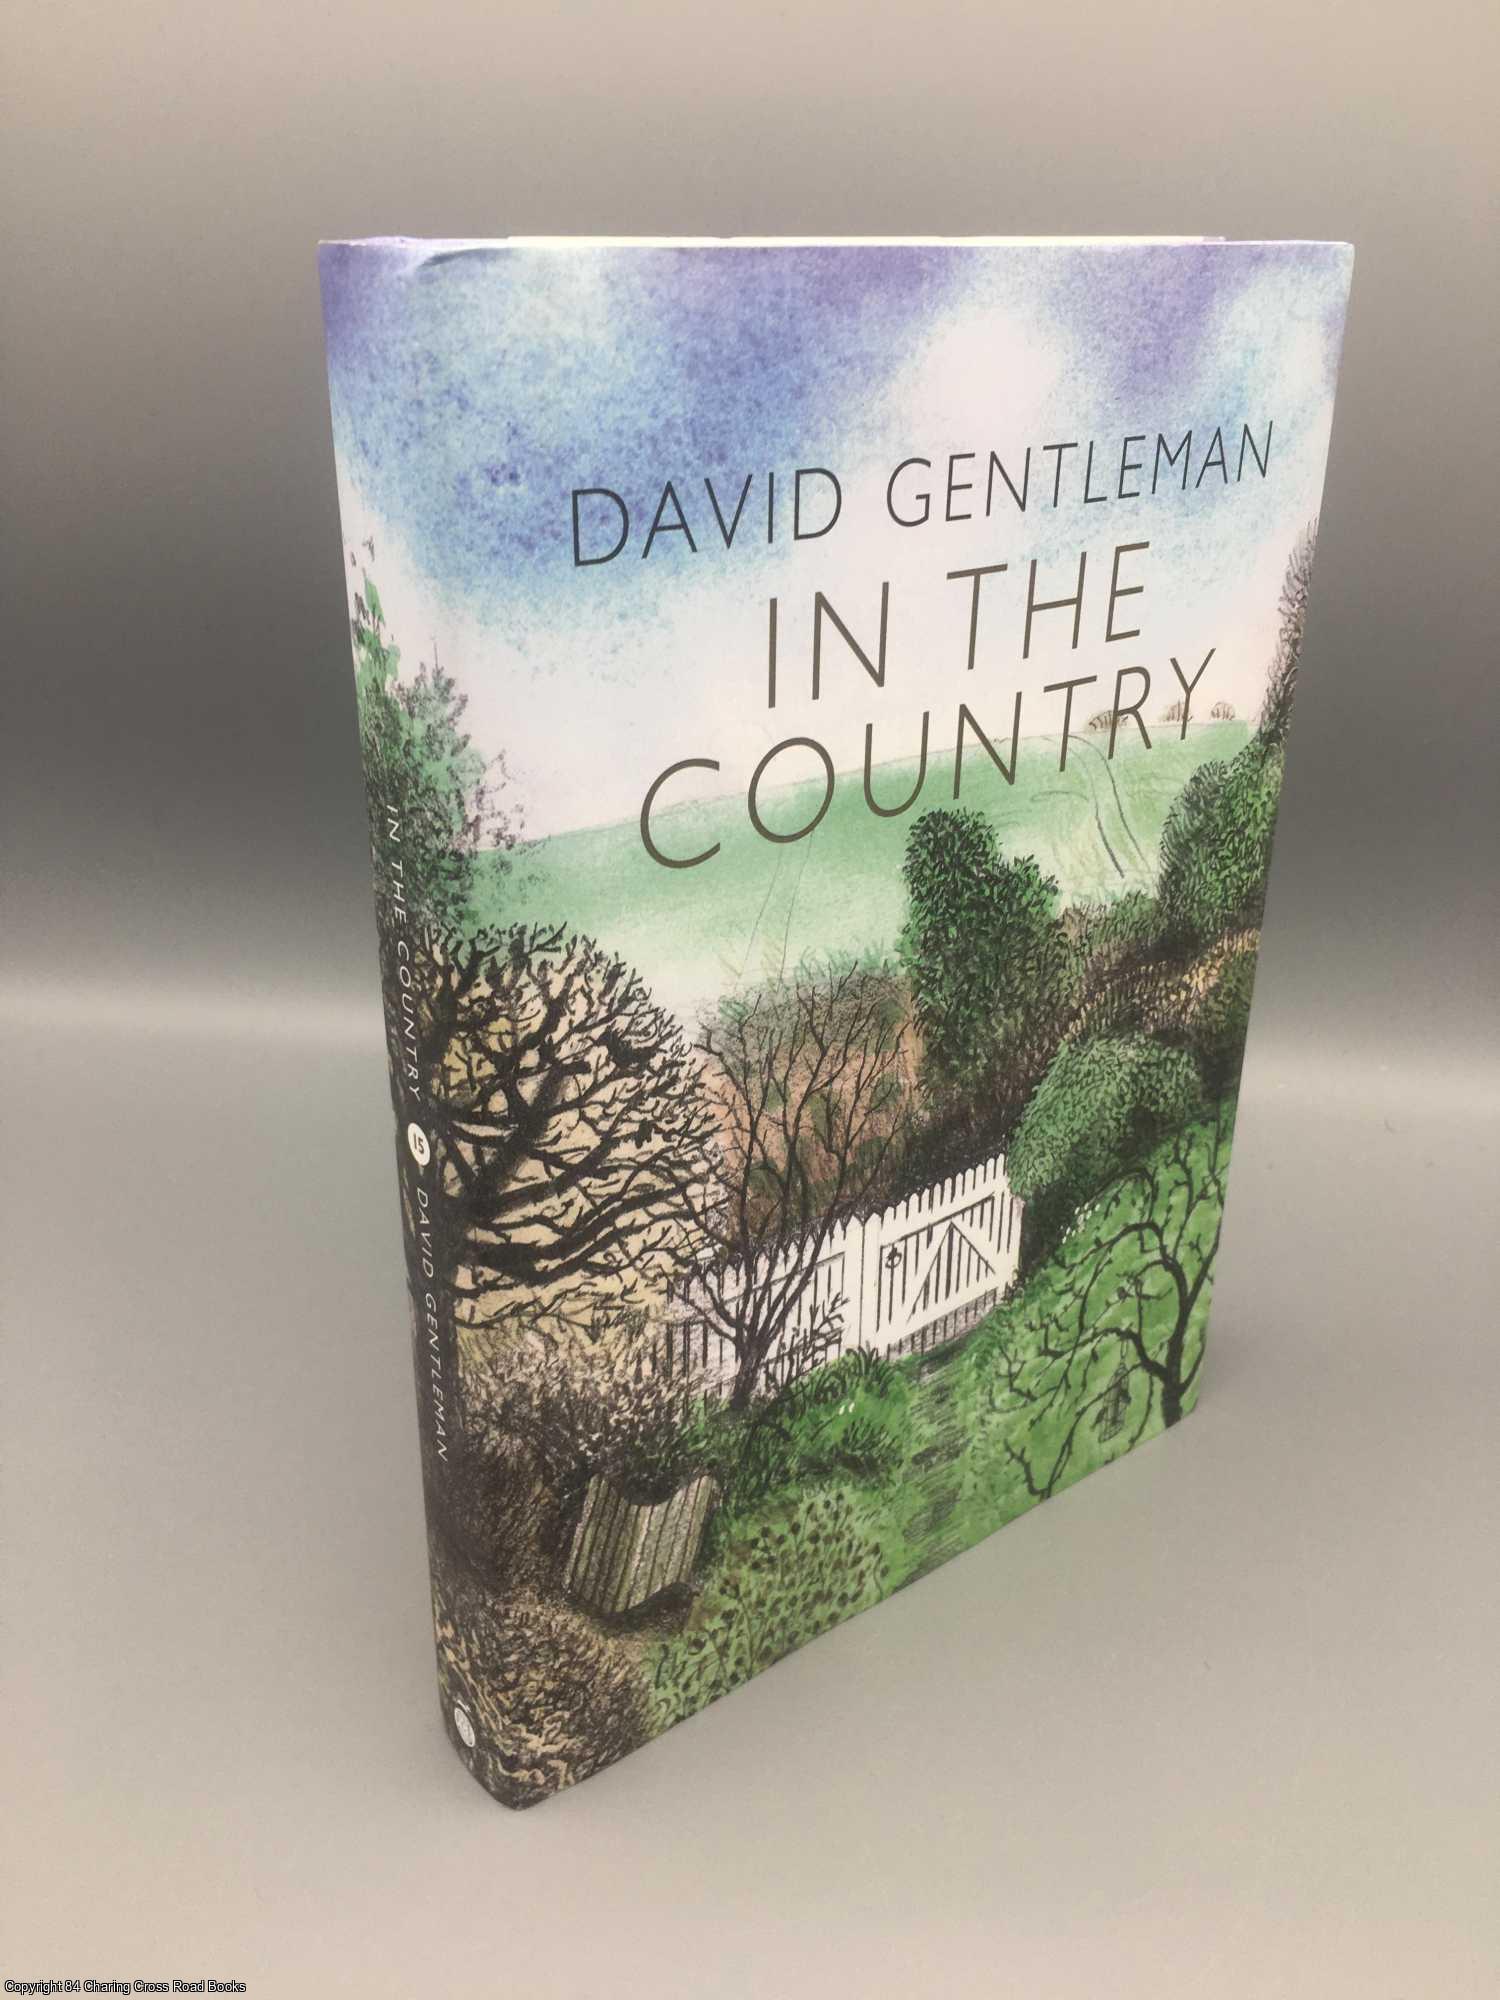 Gentleman, David - In the Country